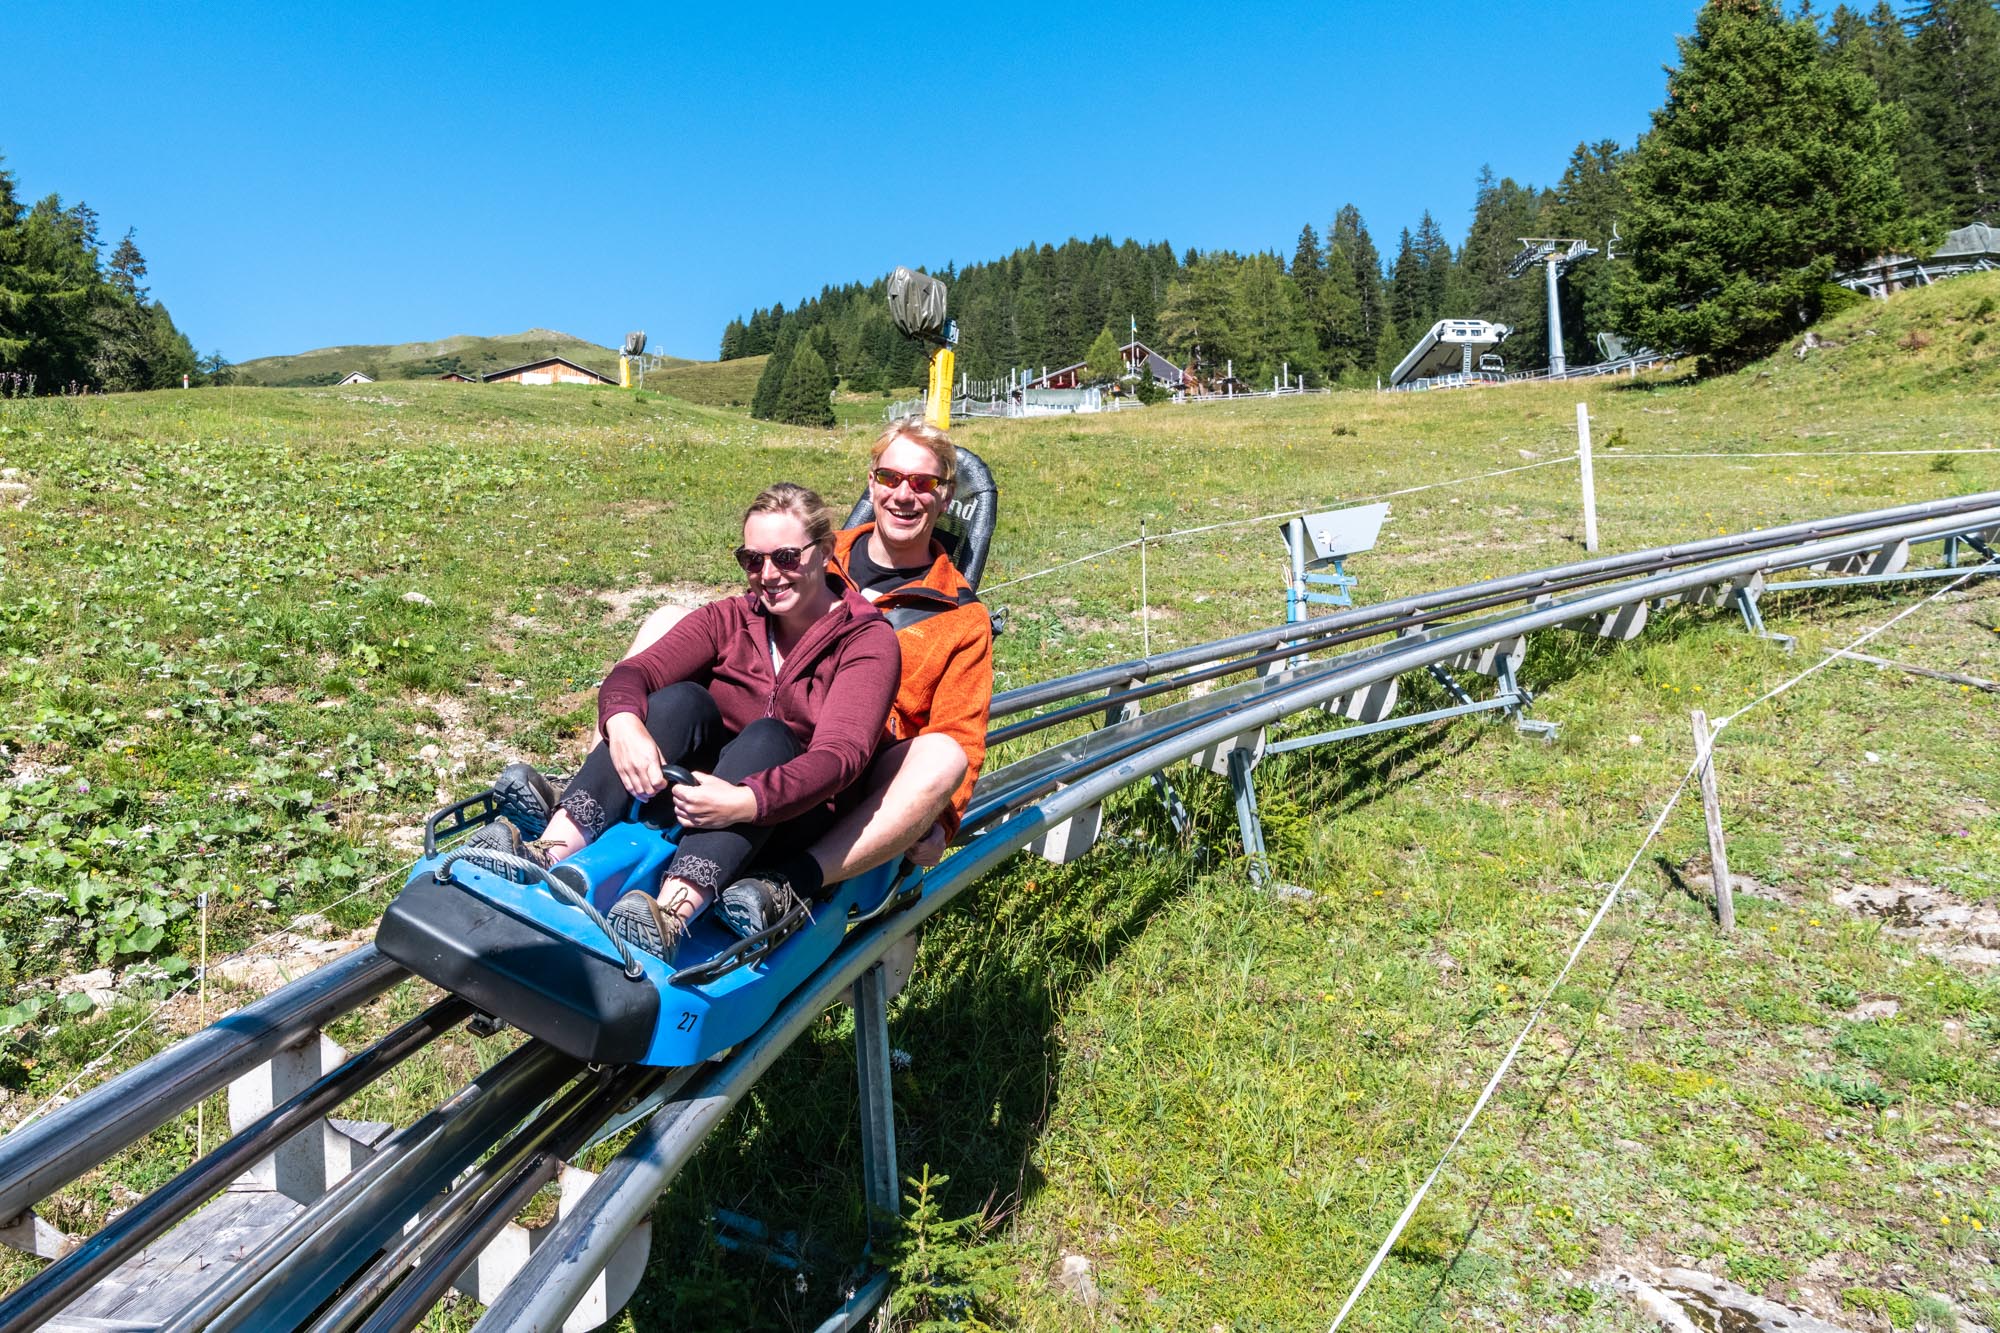 1x Tobogganing excluding chairlift